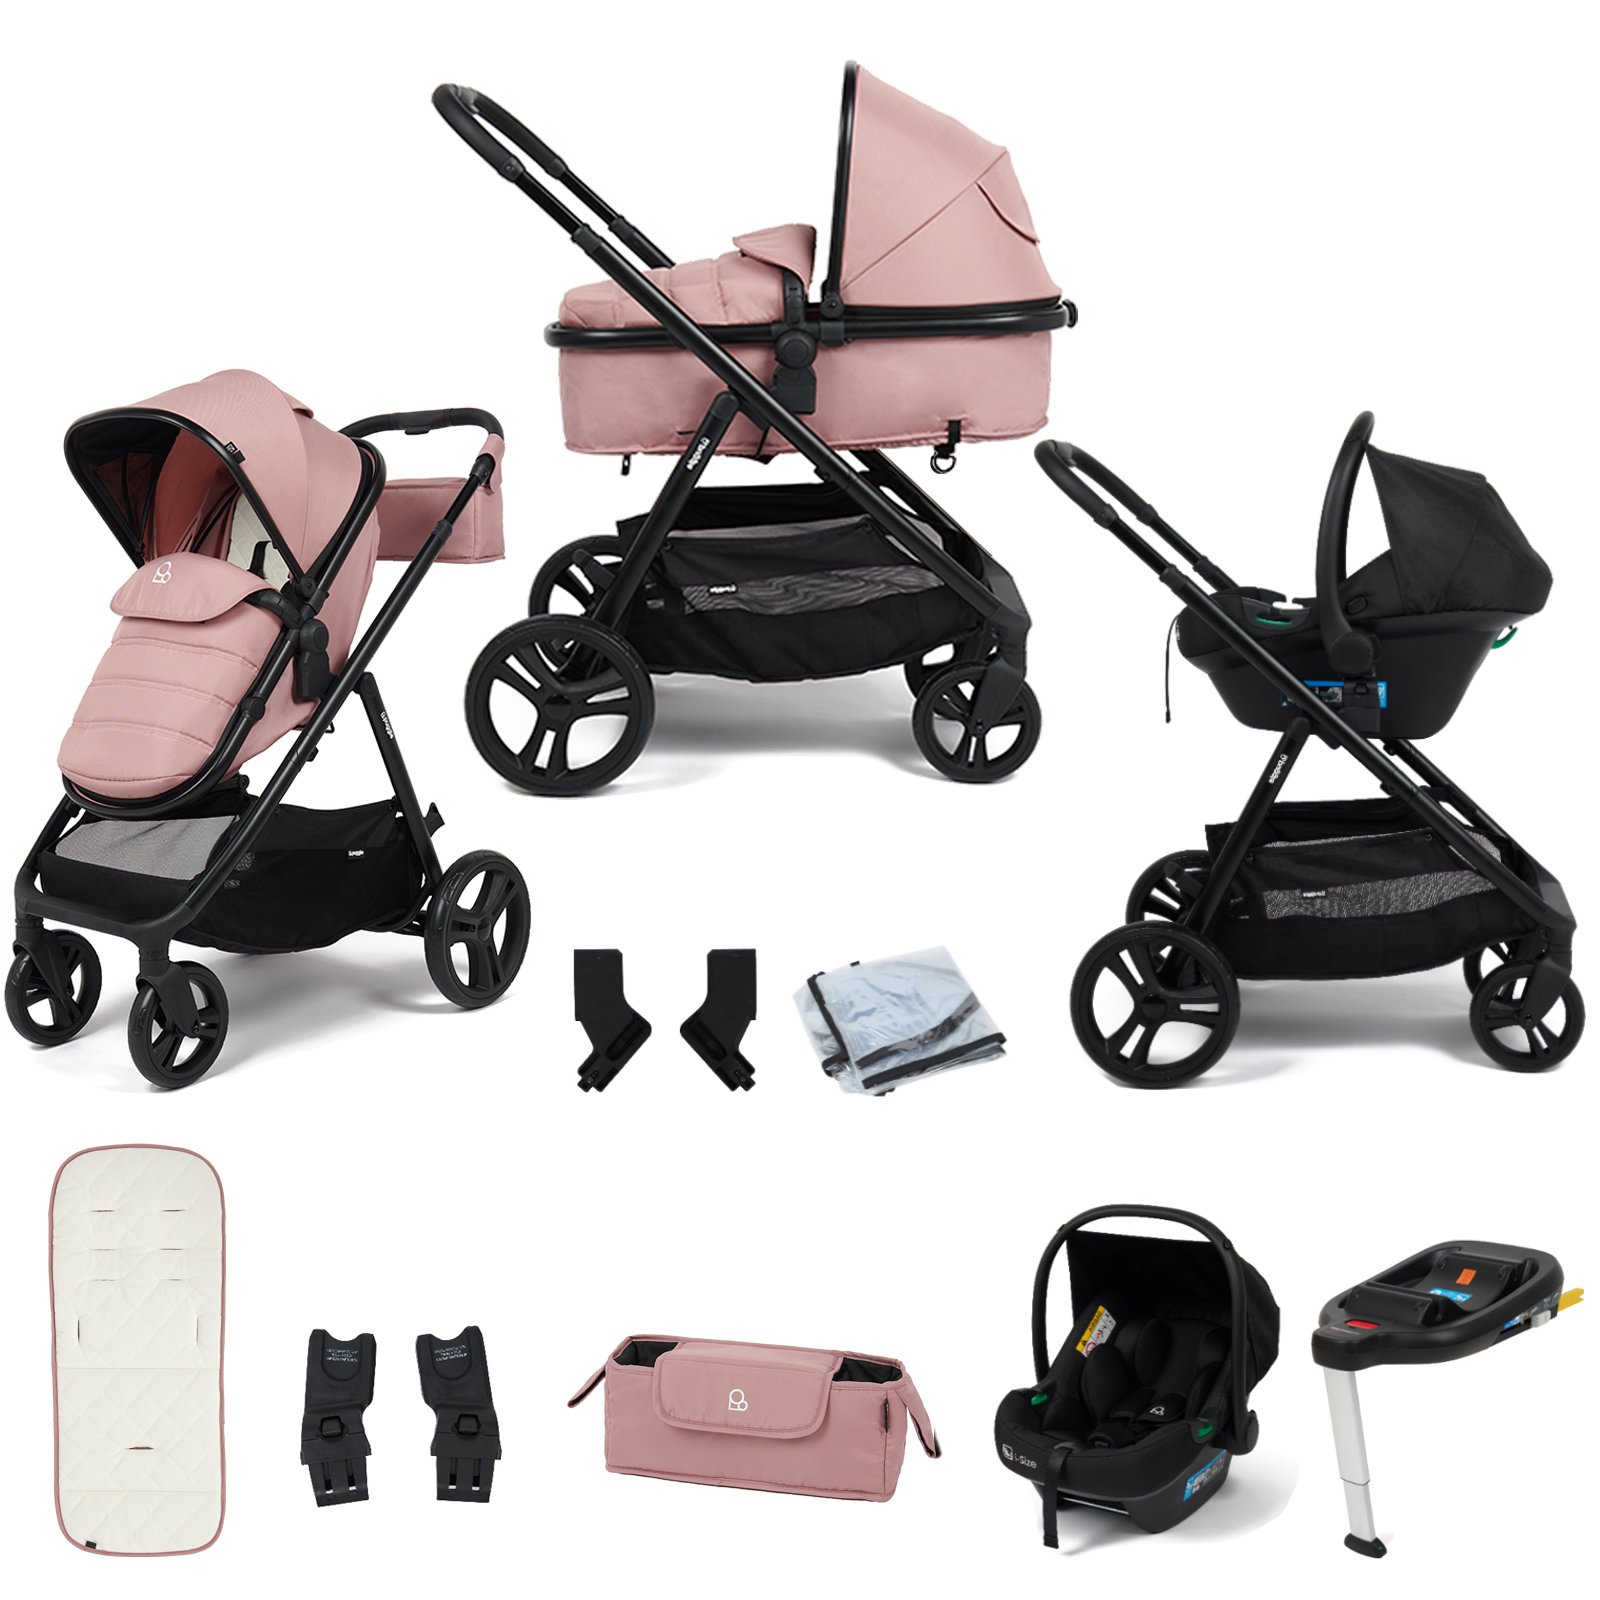 Puggle Memphis 2-in-1 i-Size Travel System with ISOFIX Base - Vintage Pink